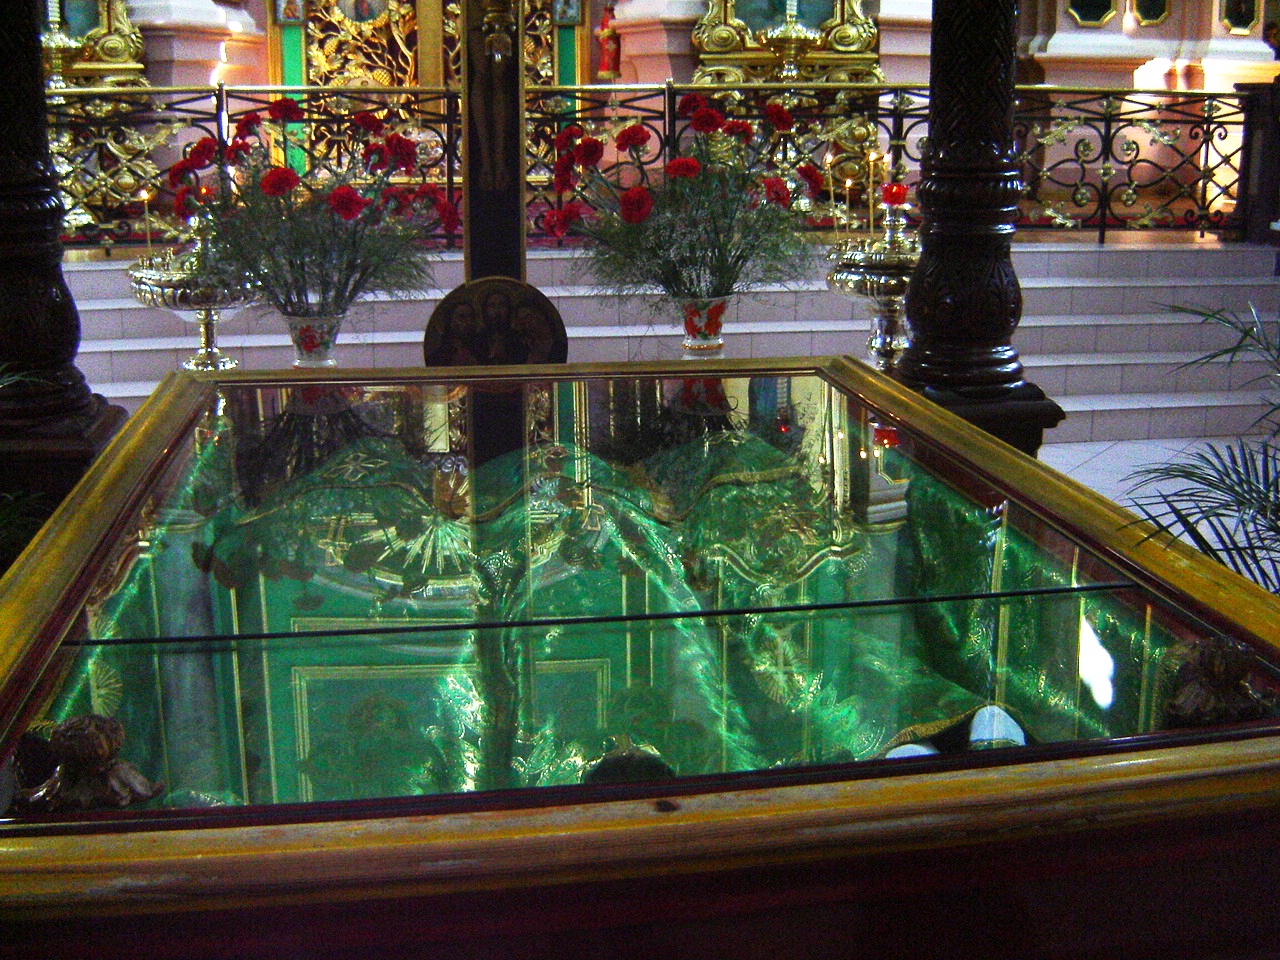 The relics of Anthony, John and Eustathios in the Orthodox Church of the Holy Spirit in Vilnius, Lithuania